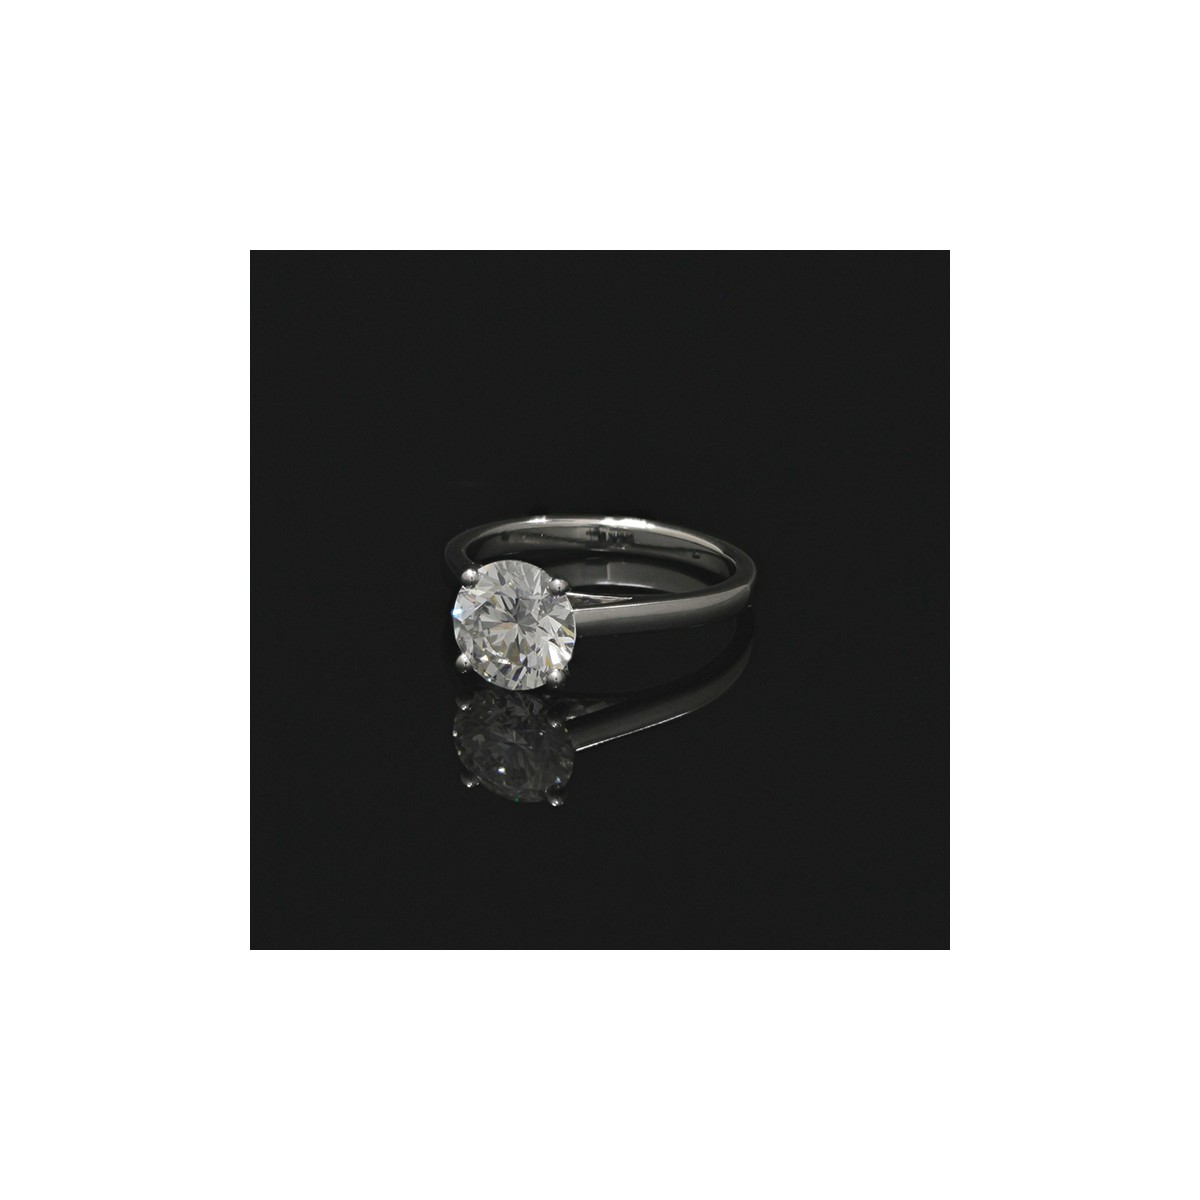 Alethea Certified Diamond Solitaire Engagement Ring (1 ct. t.w.) in 14k  White Gold featuring diamonds with the De Beers Code of Origin, Created for  Ma | CoolSprings Galleria